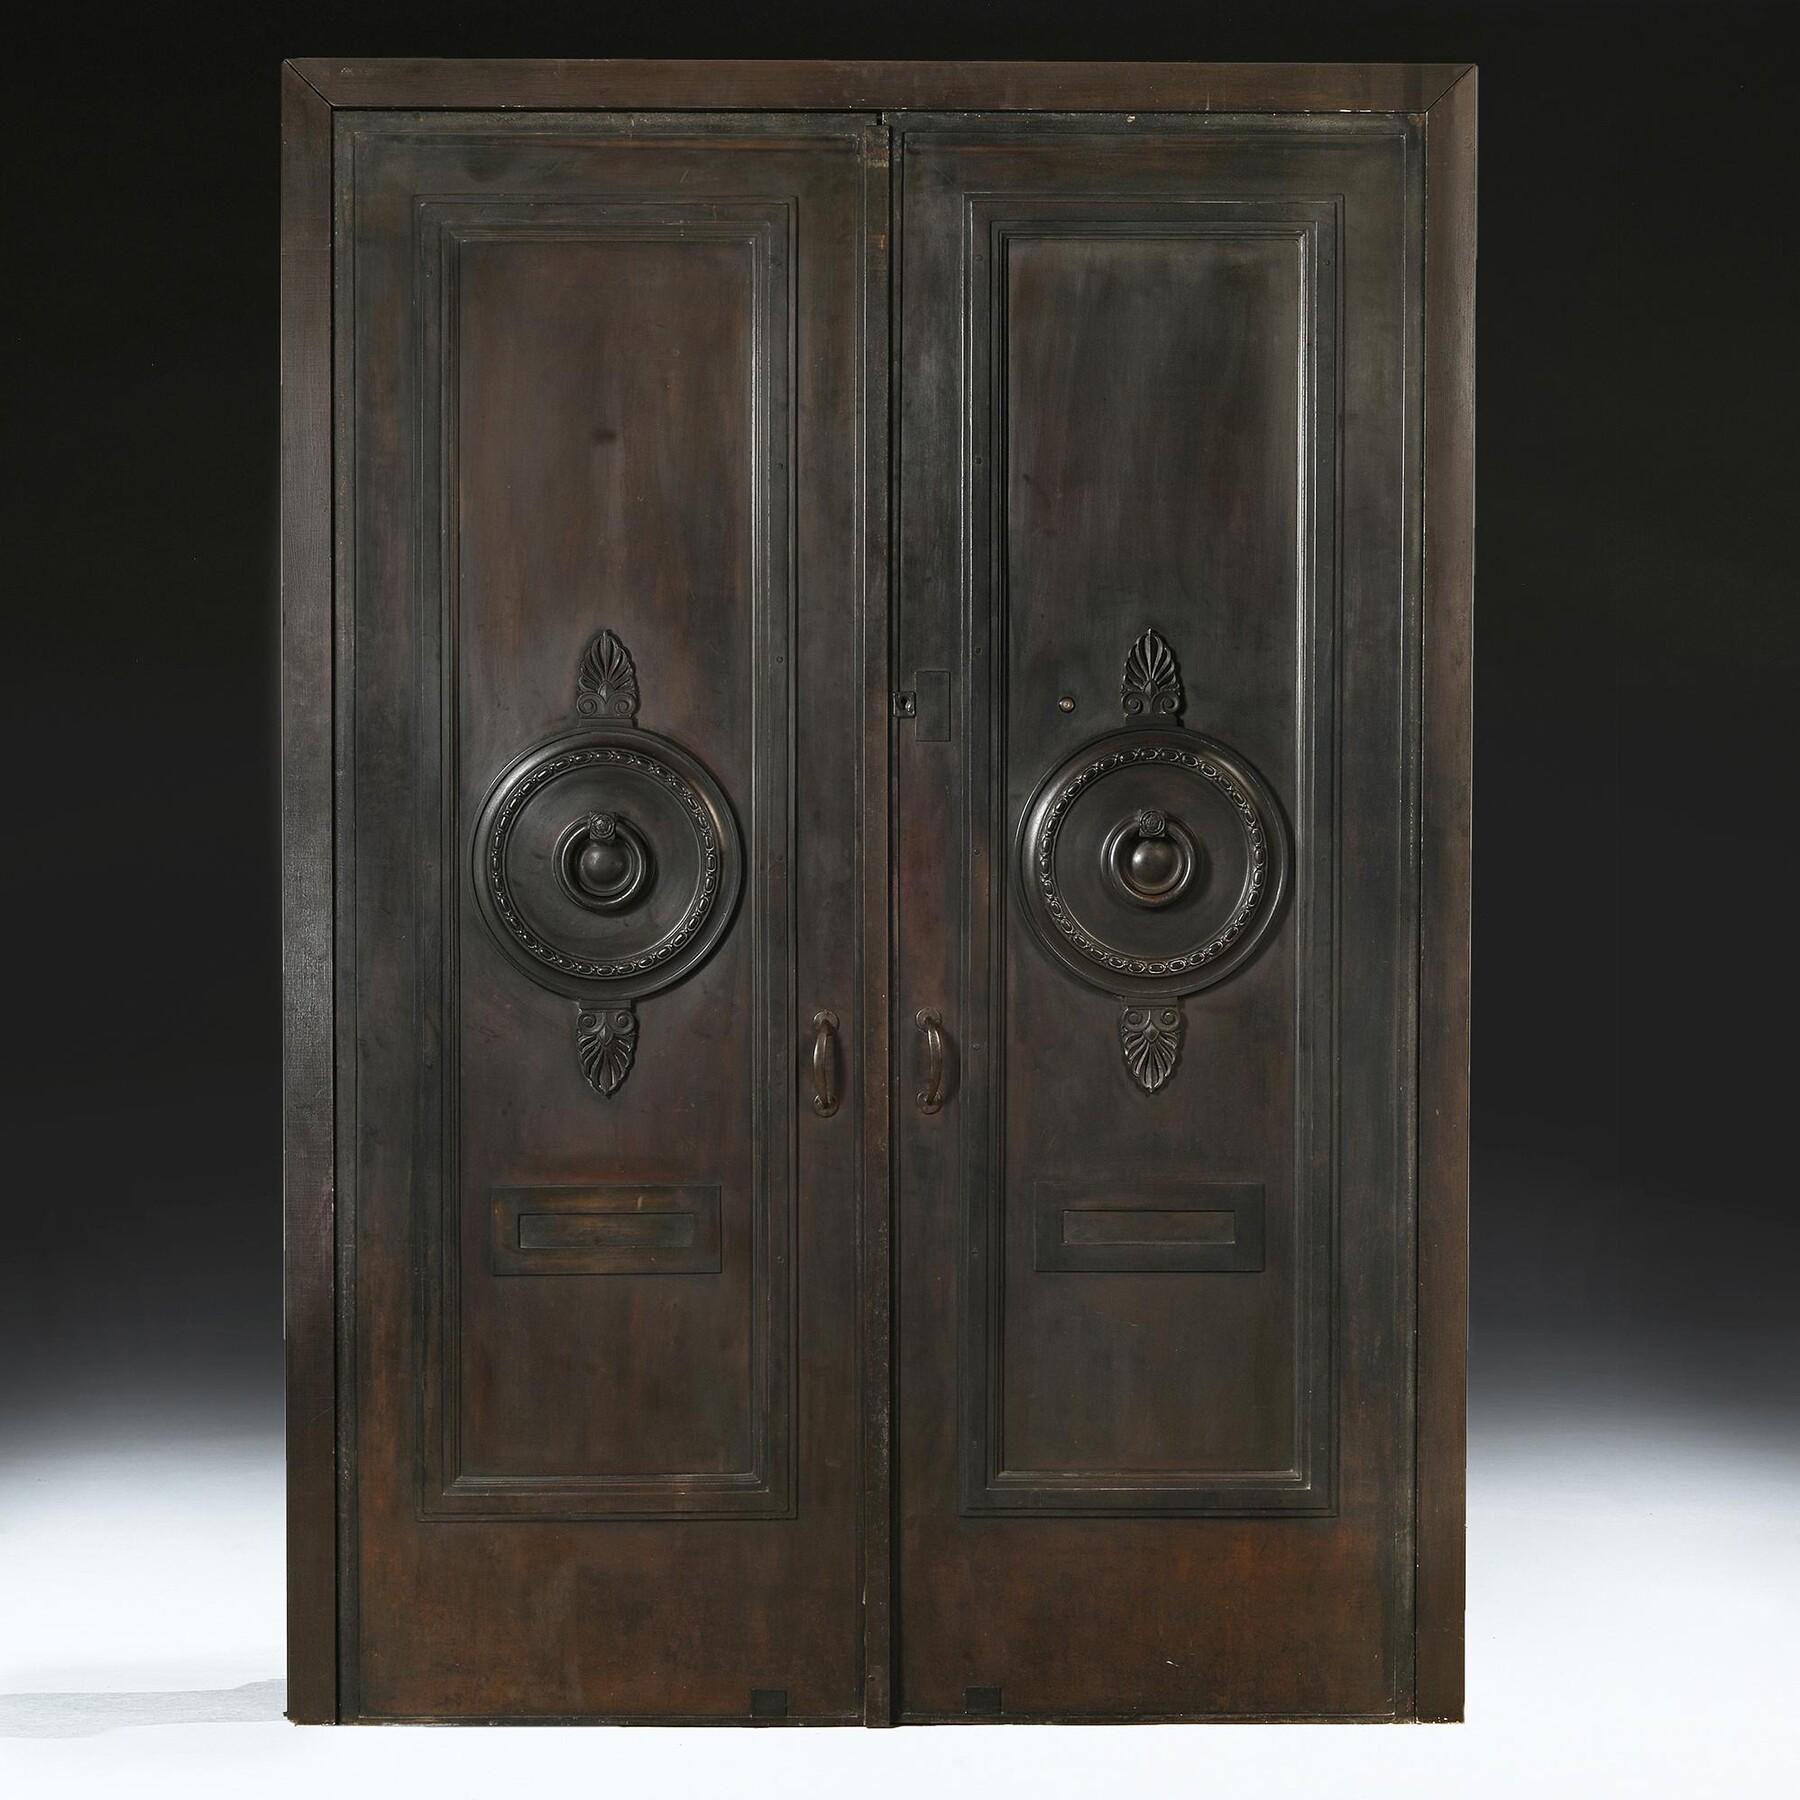 A Wonderful Pair of Imposing Bronze Entrance Strong Doors of the Finest Quality 
English Circa 1900
Of bronze over a core of mahogany, classical in style, a circular wreath centred by a ring handle suspended from a hinge embellished with rose, above